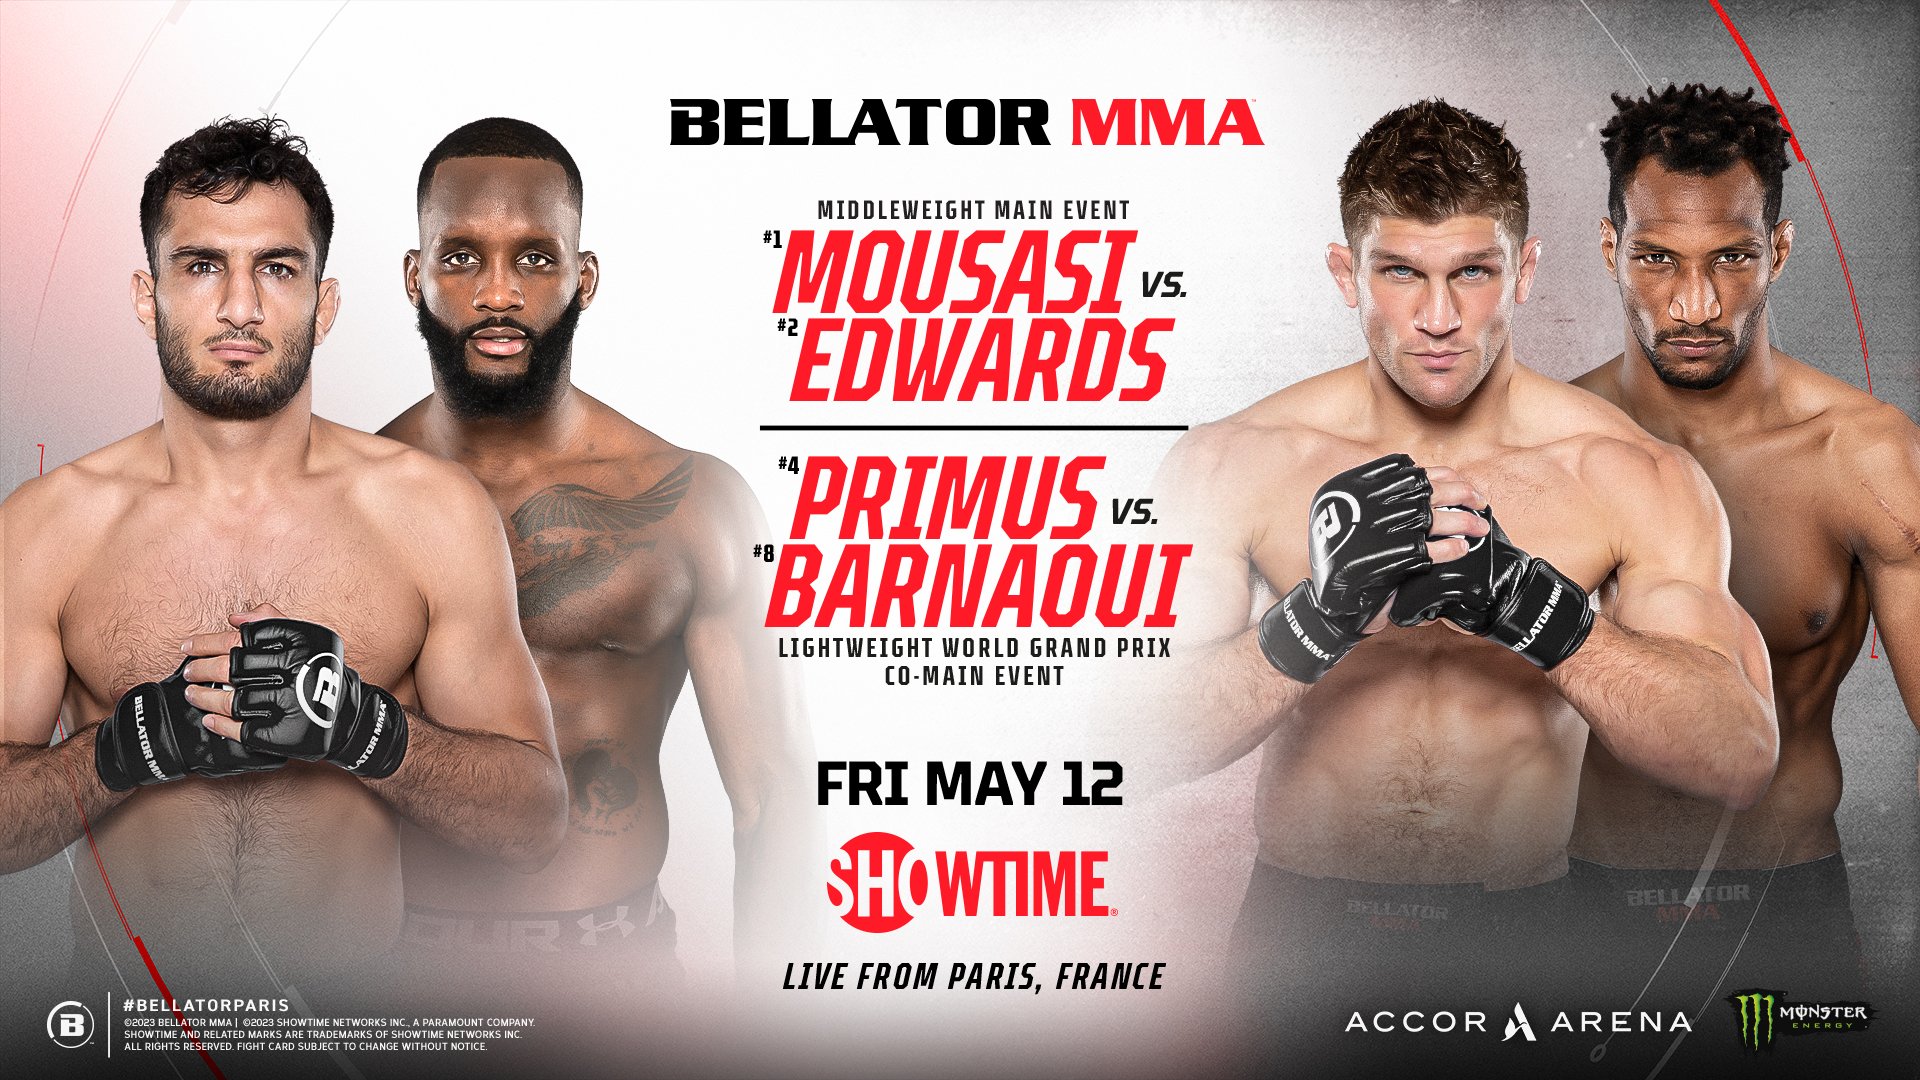 Bellator 296 is the next PPV event taking place on Friday, May 12 at the Accor Arena in Paris, France.